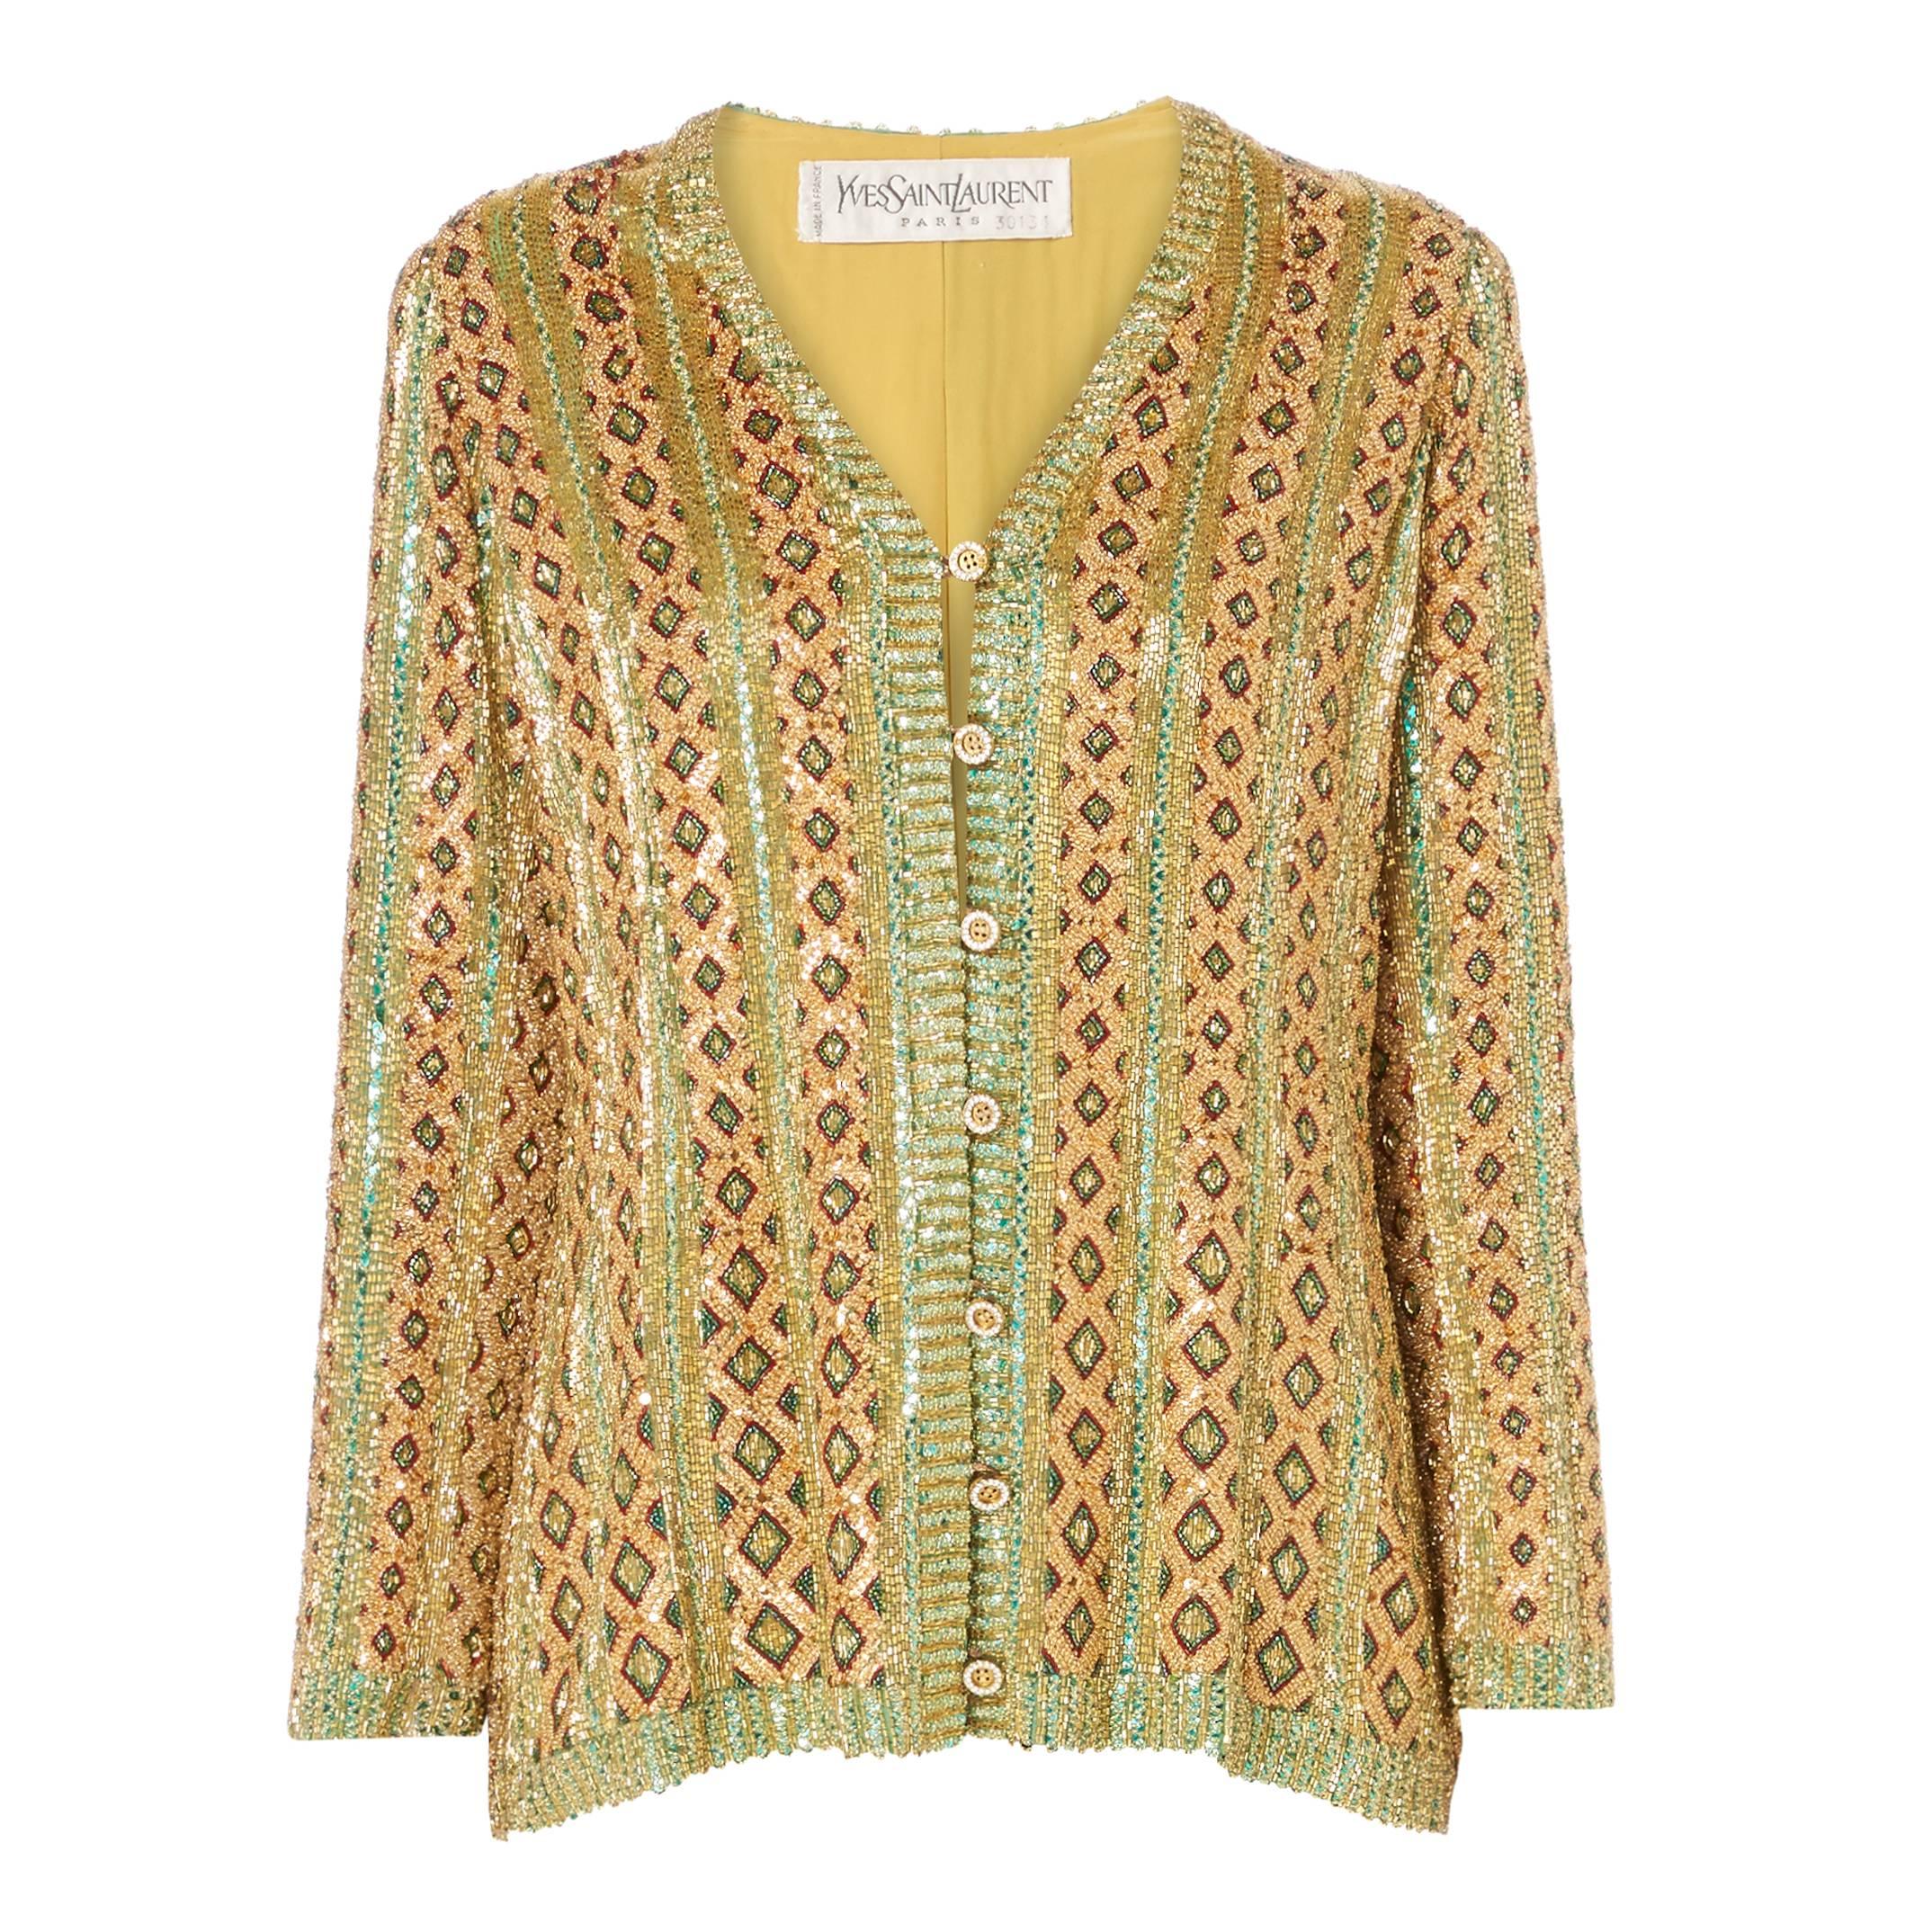 Yves Saint Laurent haute couture gold jacket, Spring/Summer 1973 For Sale